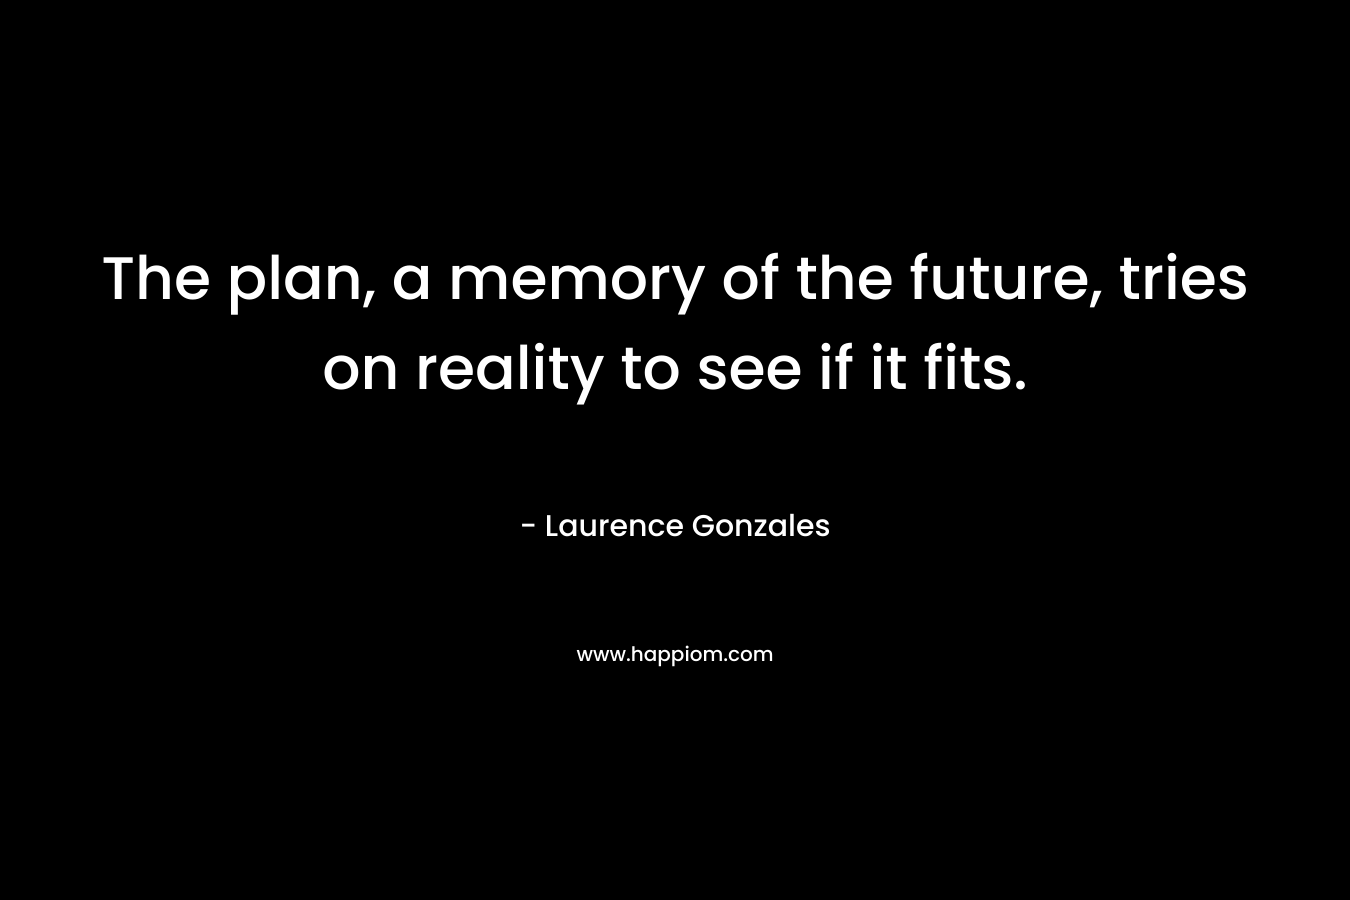 The plan, a memory of the future, tries on reality to see if it fits.